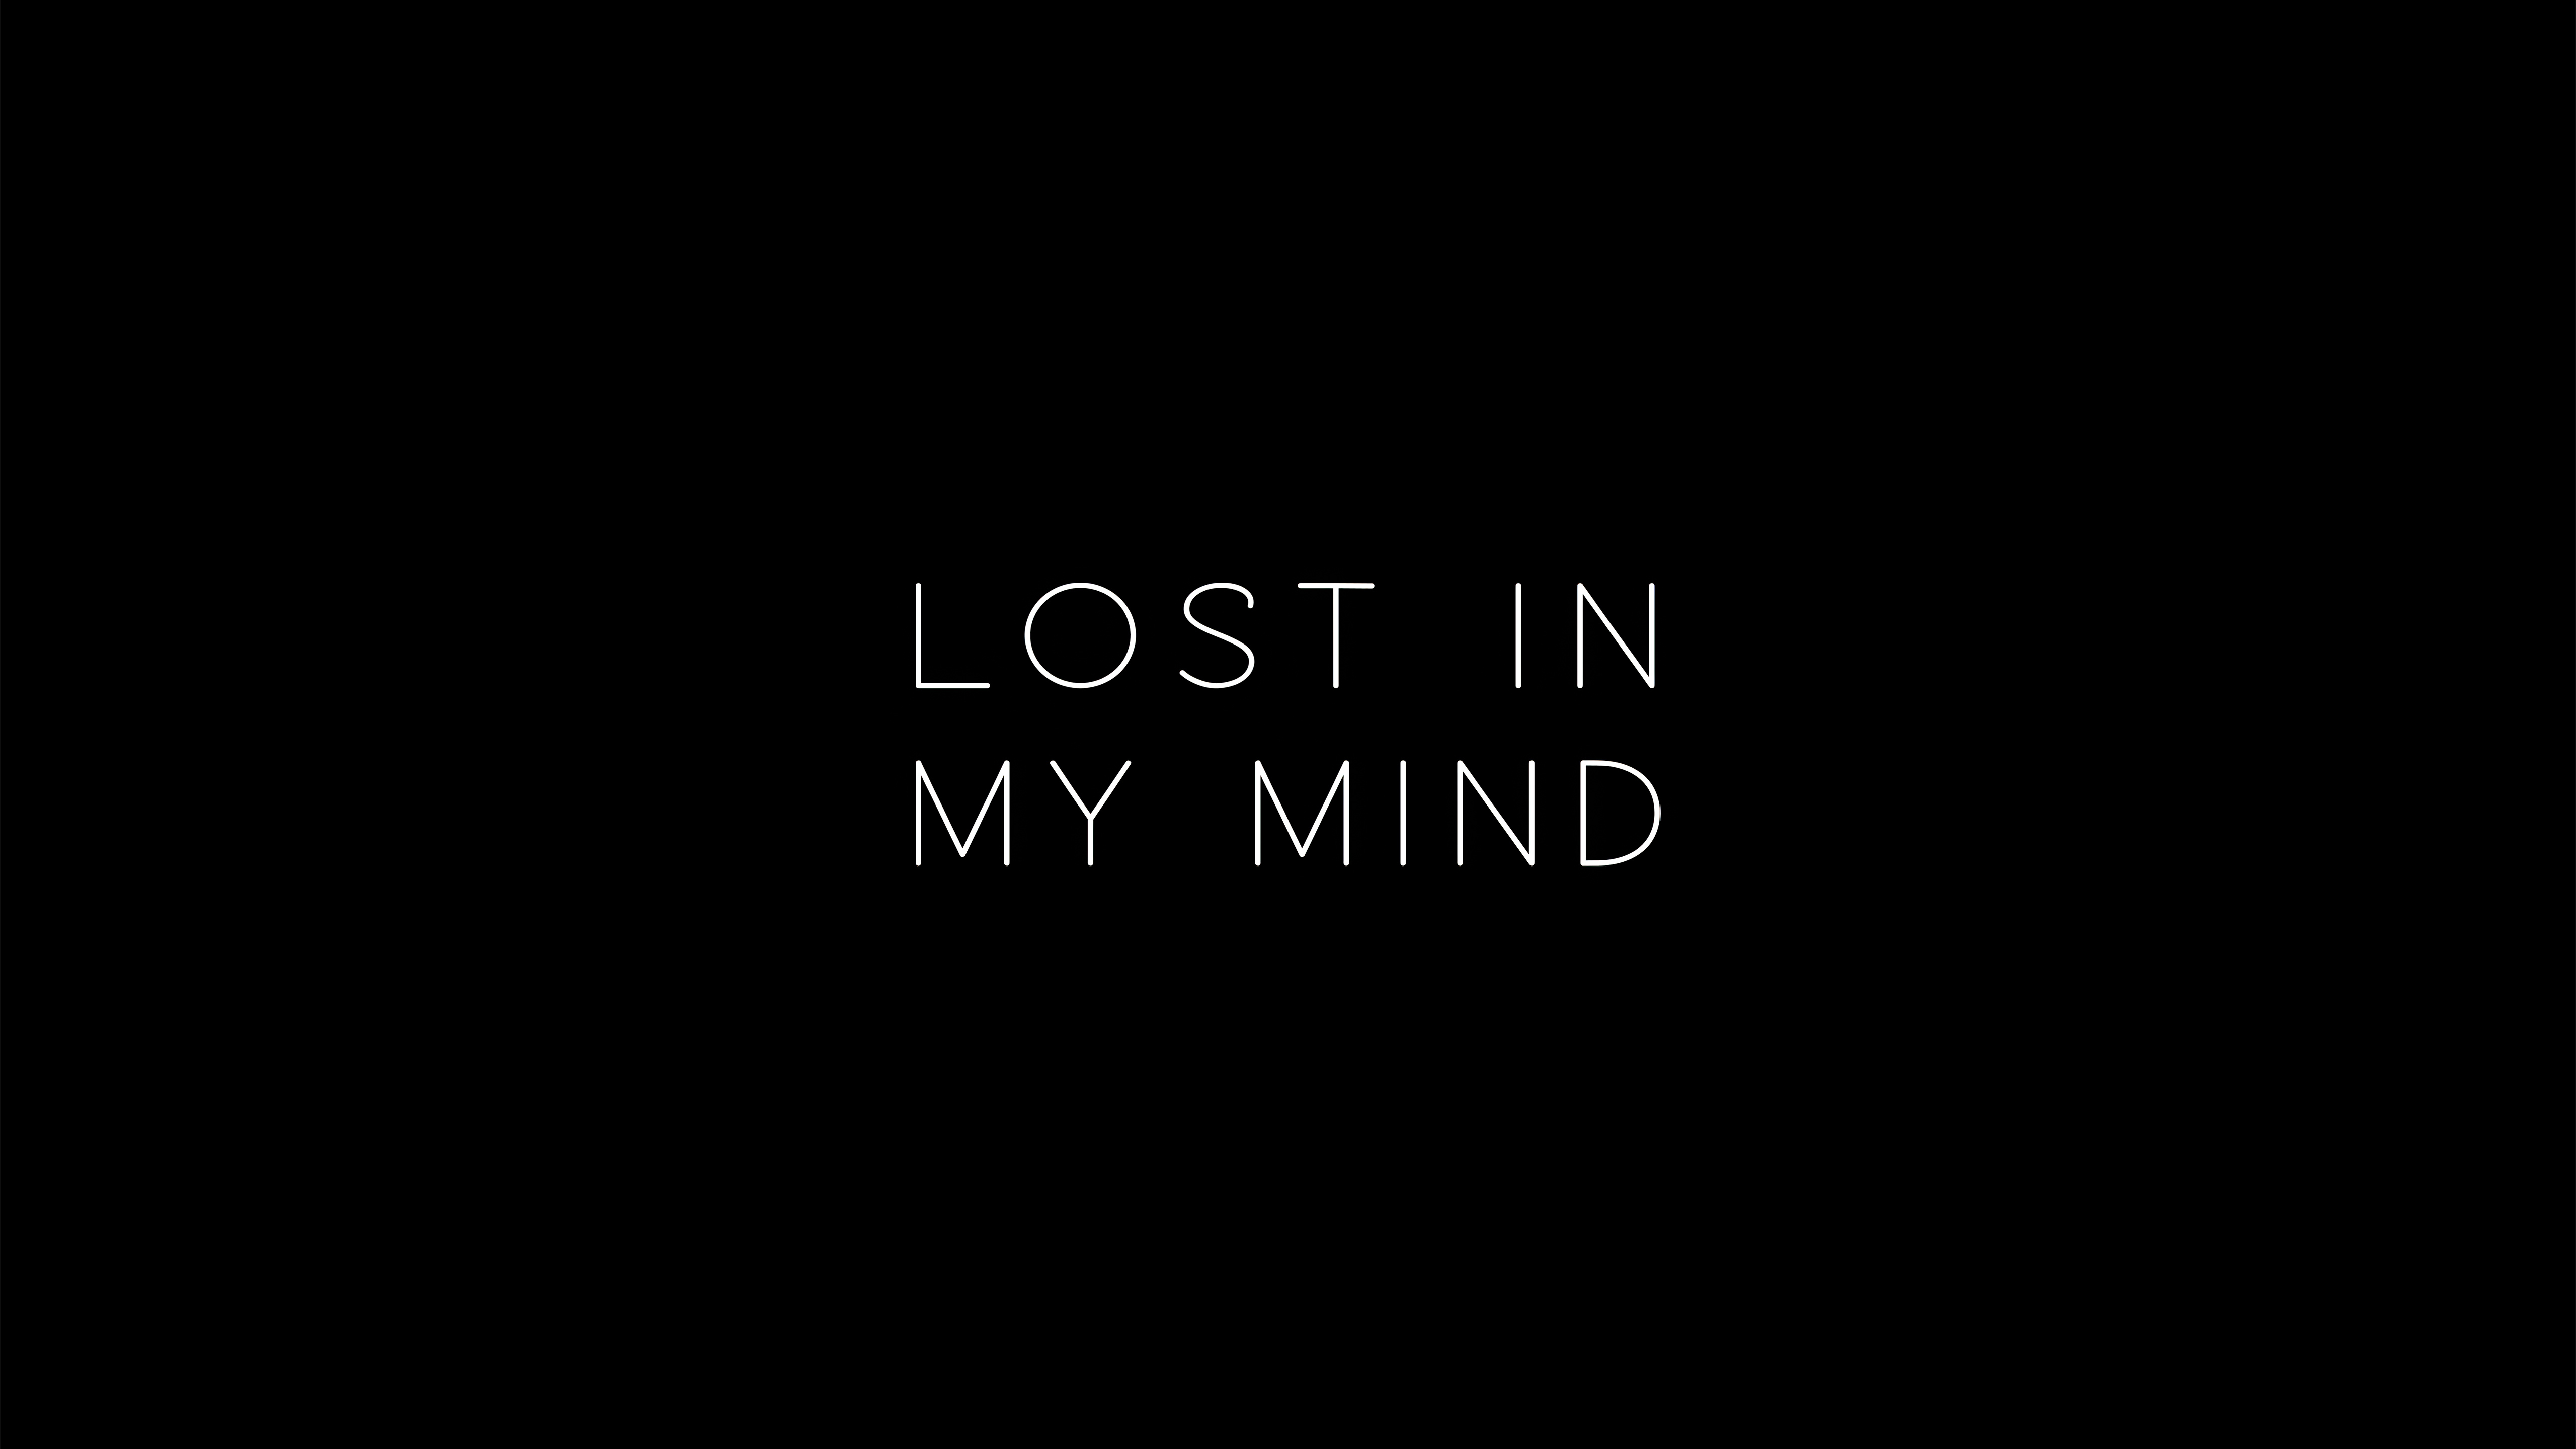 Lost In My Mind 5k Wallpaperhd Typography Wallpapers4k Wallpapers